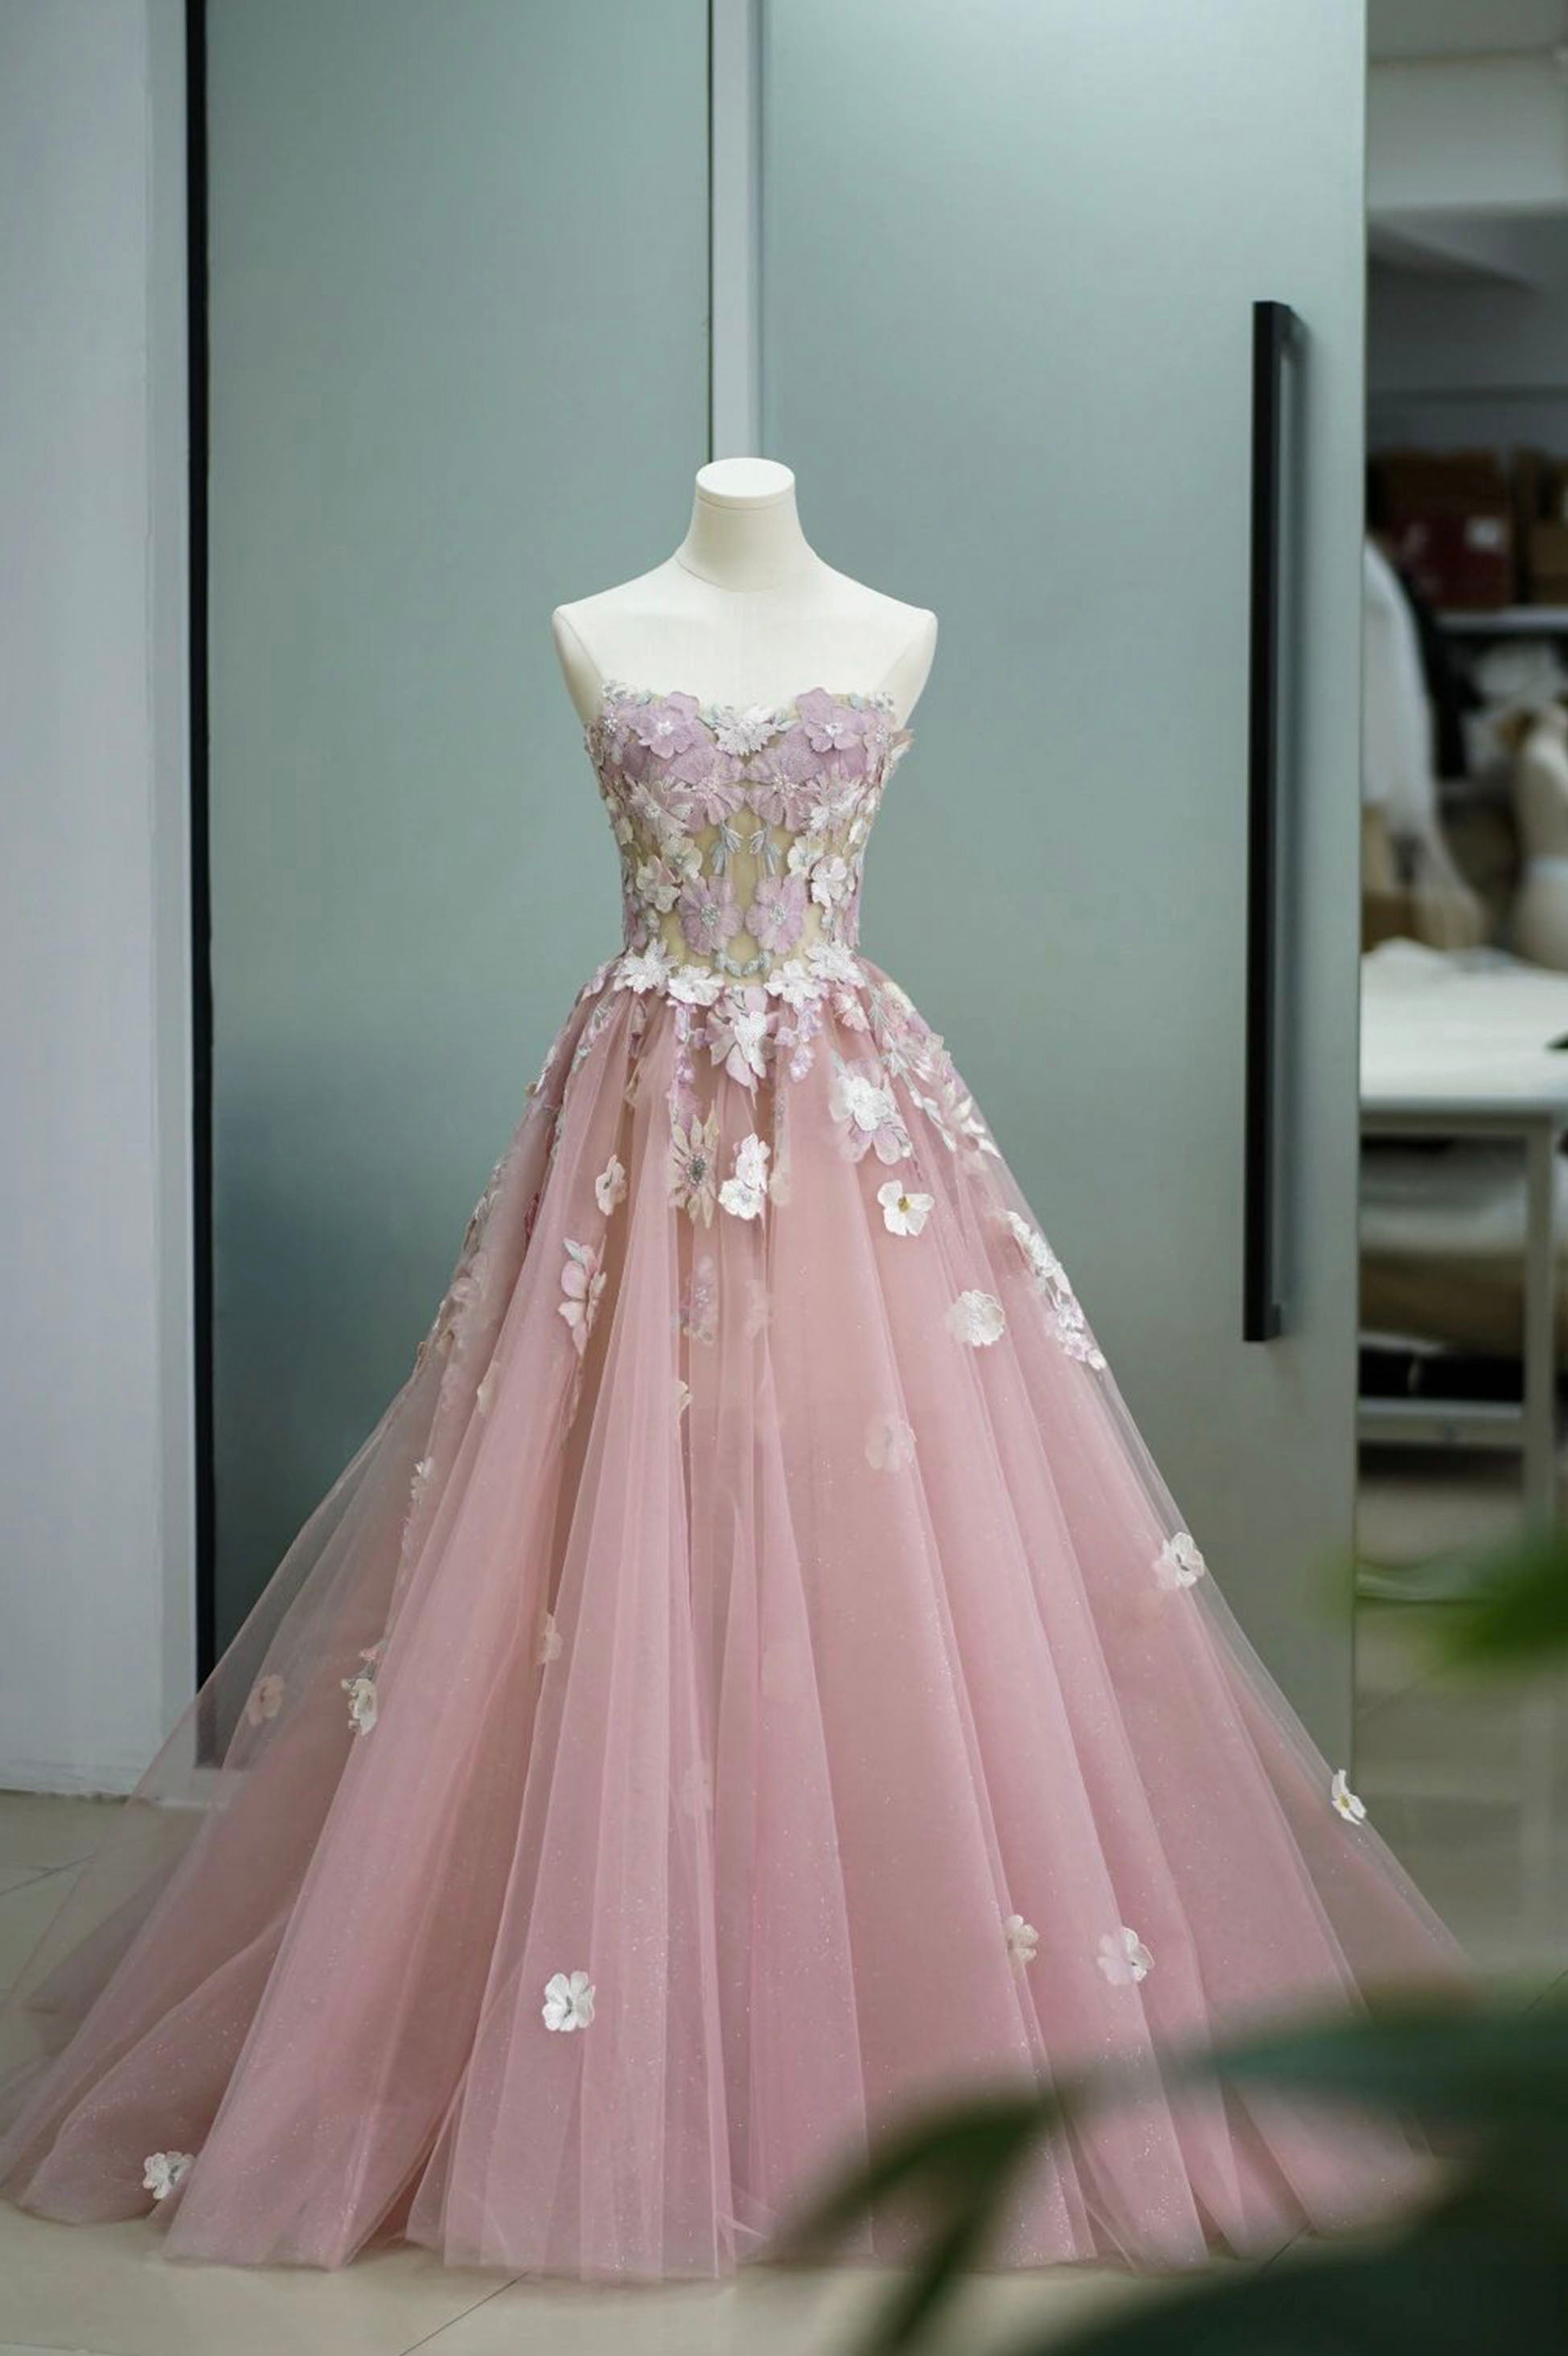 Pink Tulle Lace Long Corset Prom Dress, Strapless A-Line Evening Graduation Dress outfits, Evening Dresses Online